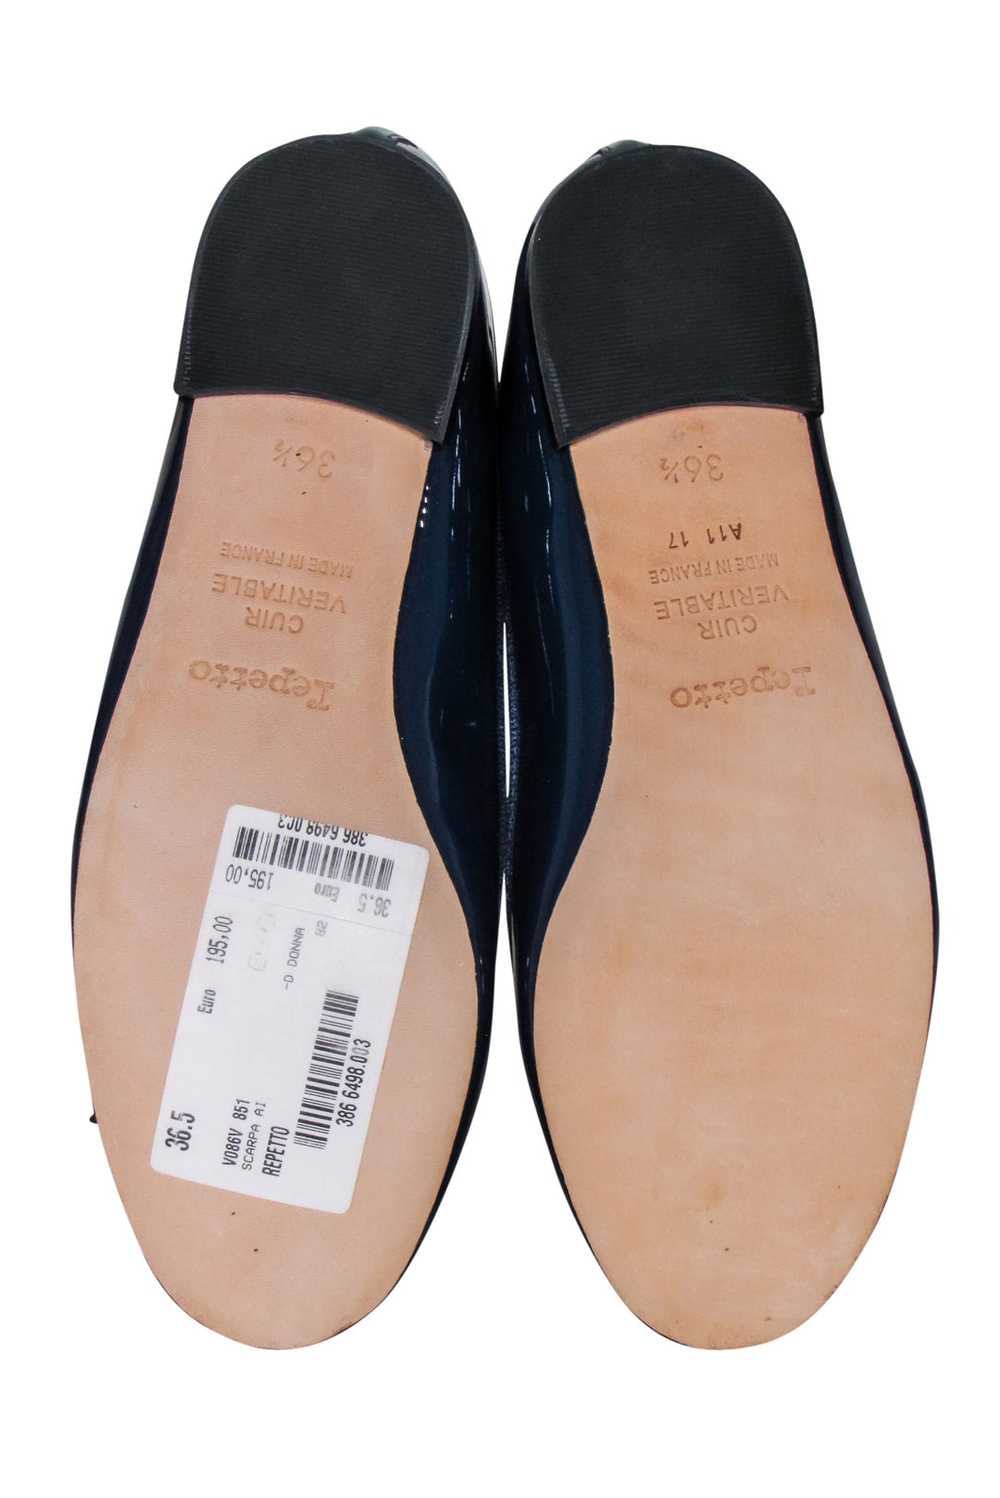 Repetto - Navy Patent Leather "Cendrillon" Ballet… - image 5